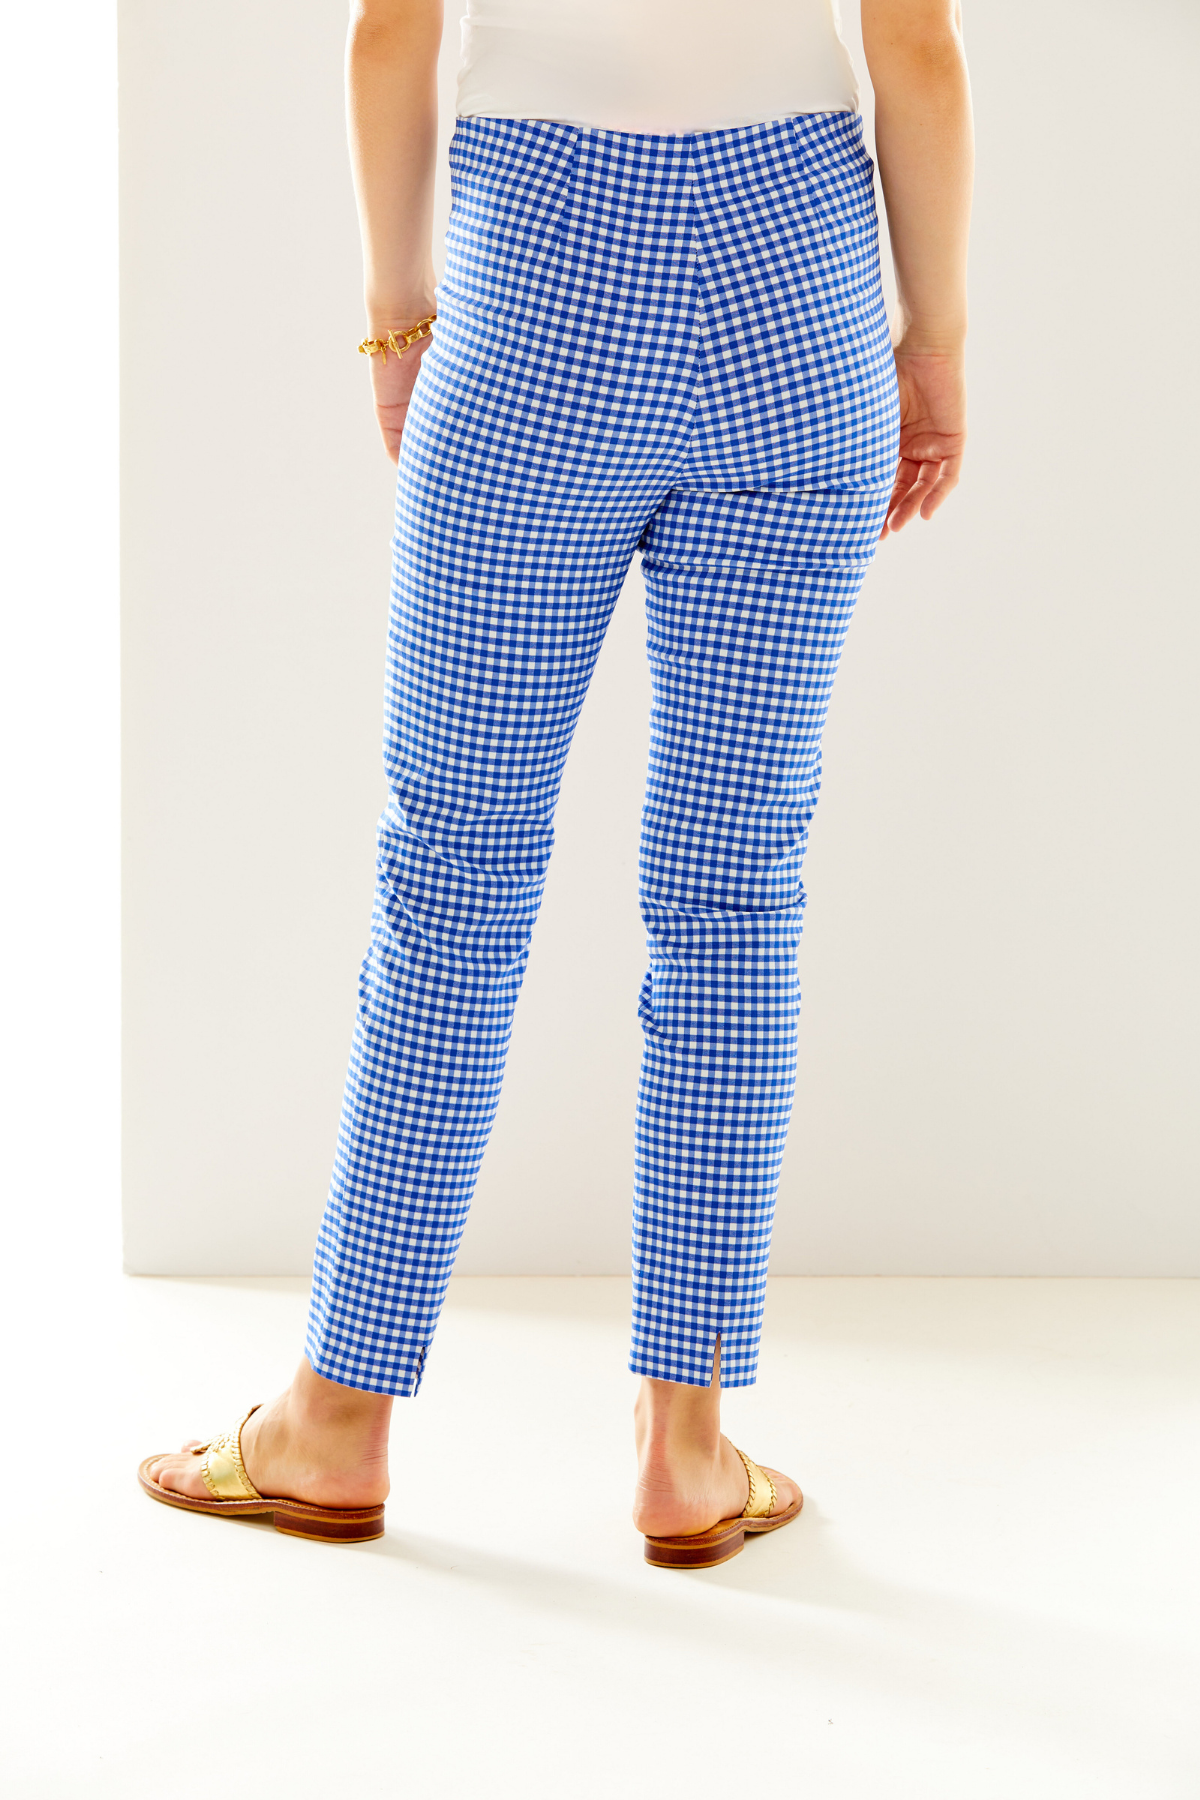 Woman in blue and white gingham pant